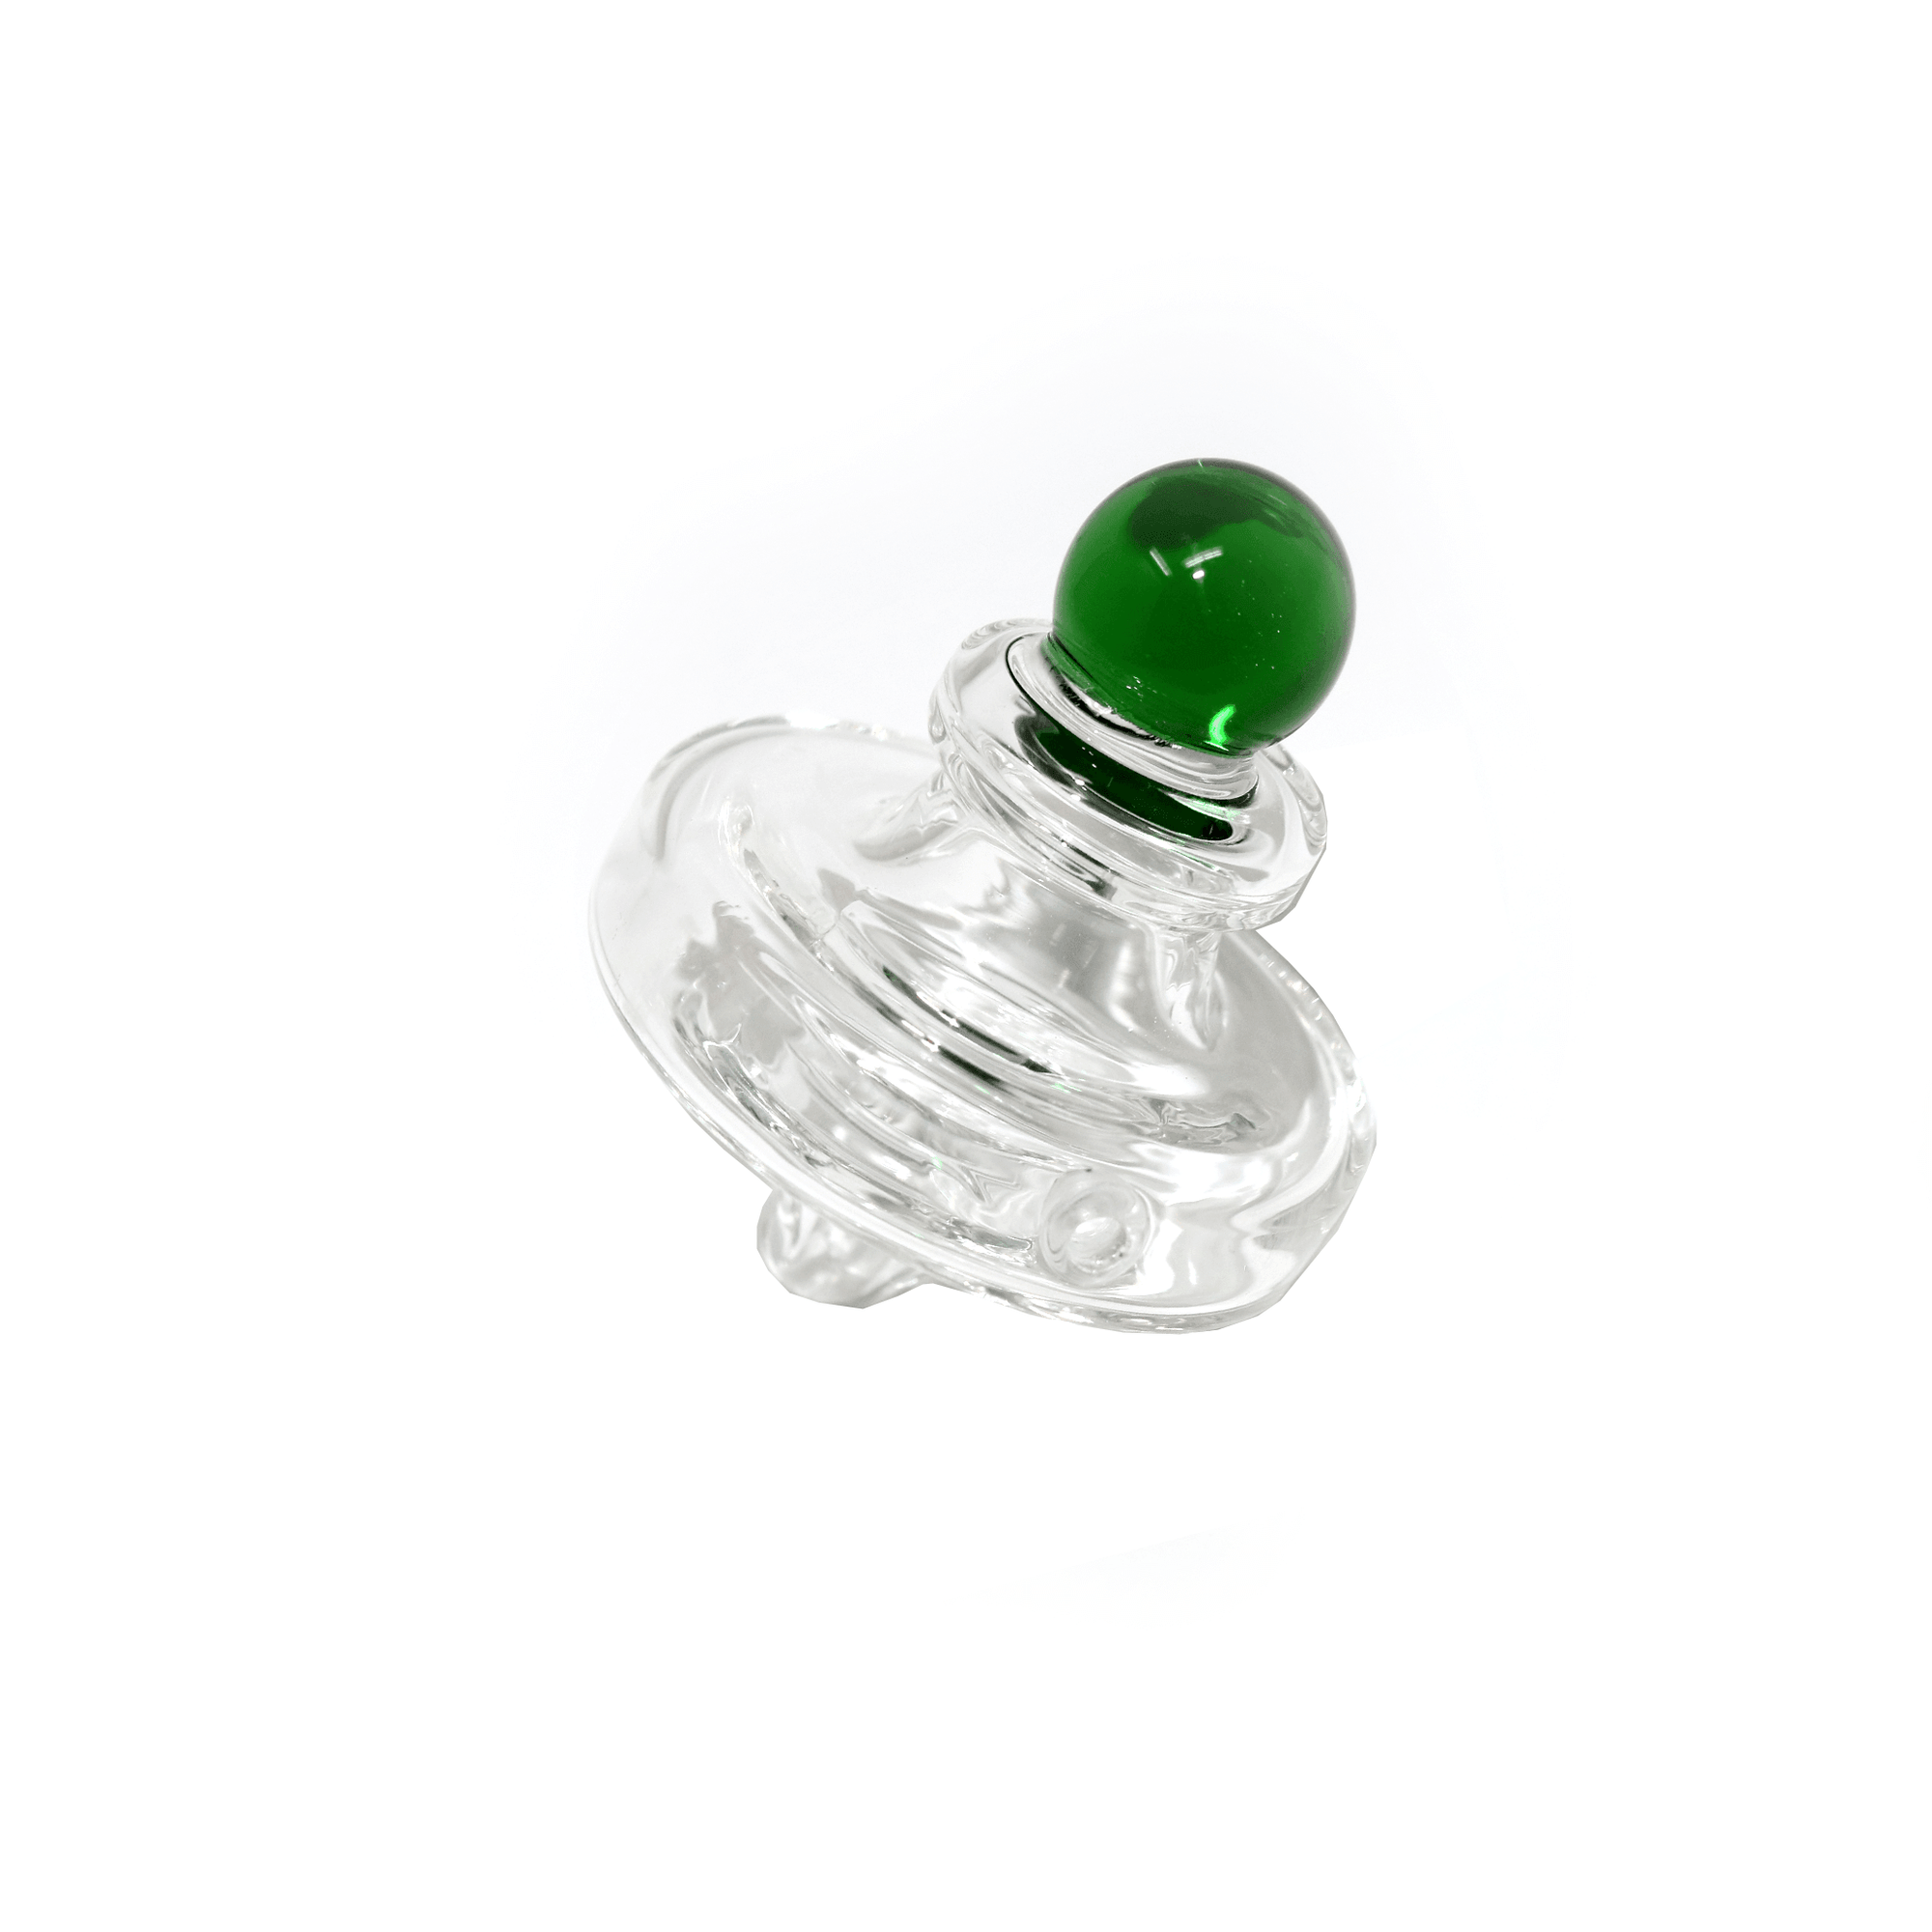 Colorful Flying Saucer Carb Cap | Profile View | the dabbing specialists